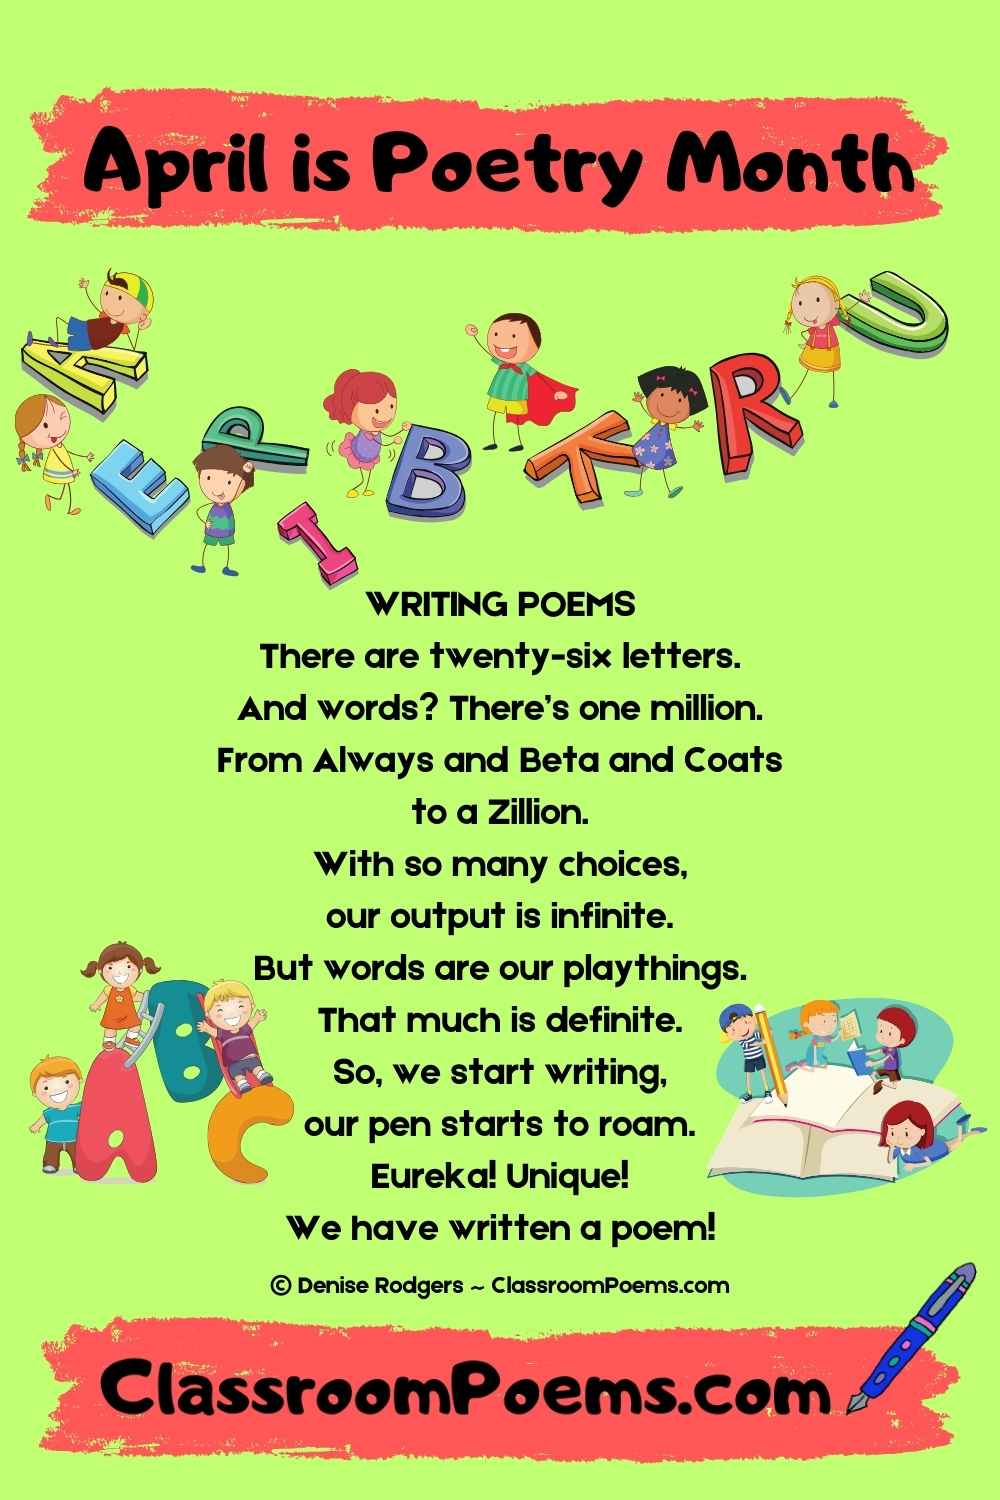 Enjoy a Poem of the Week by Denise Rodgers on ClassroomPoems.com